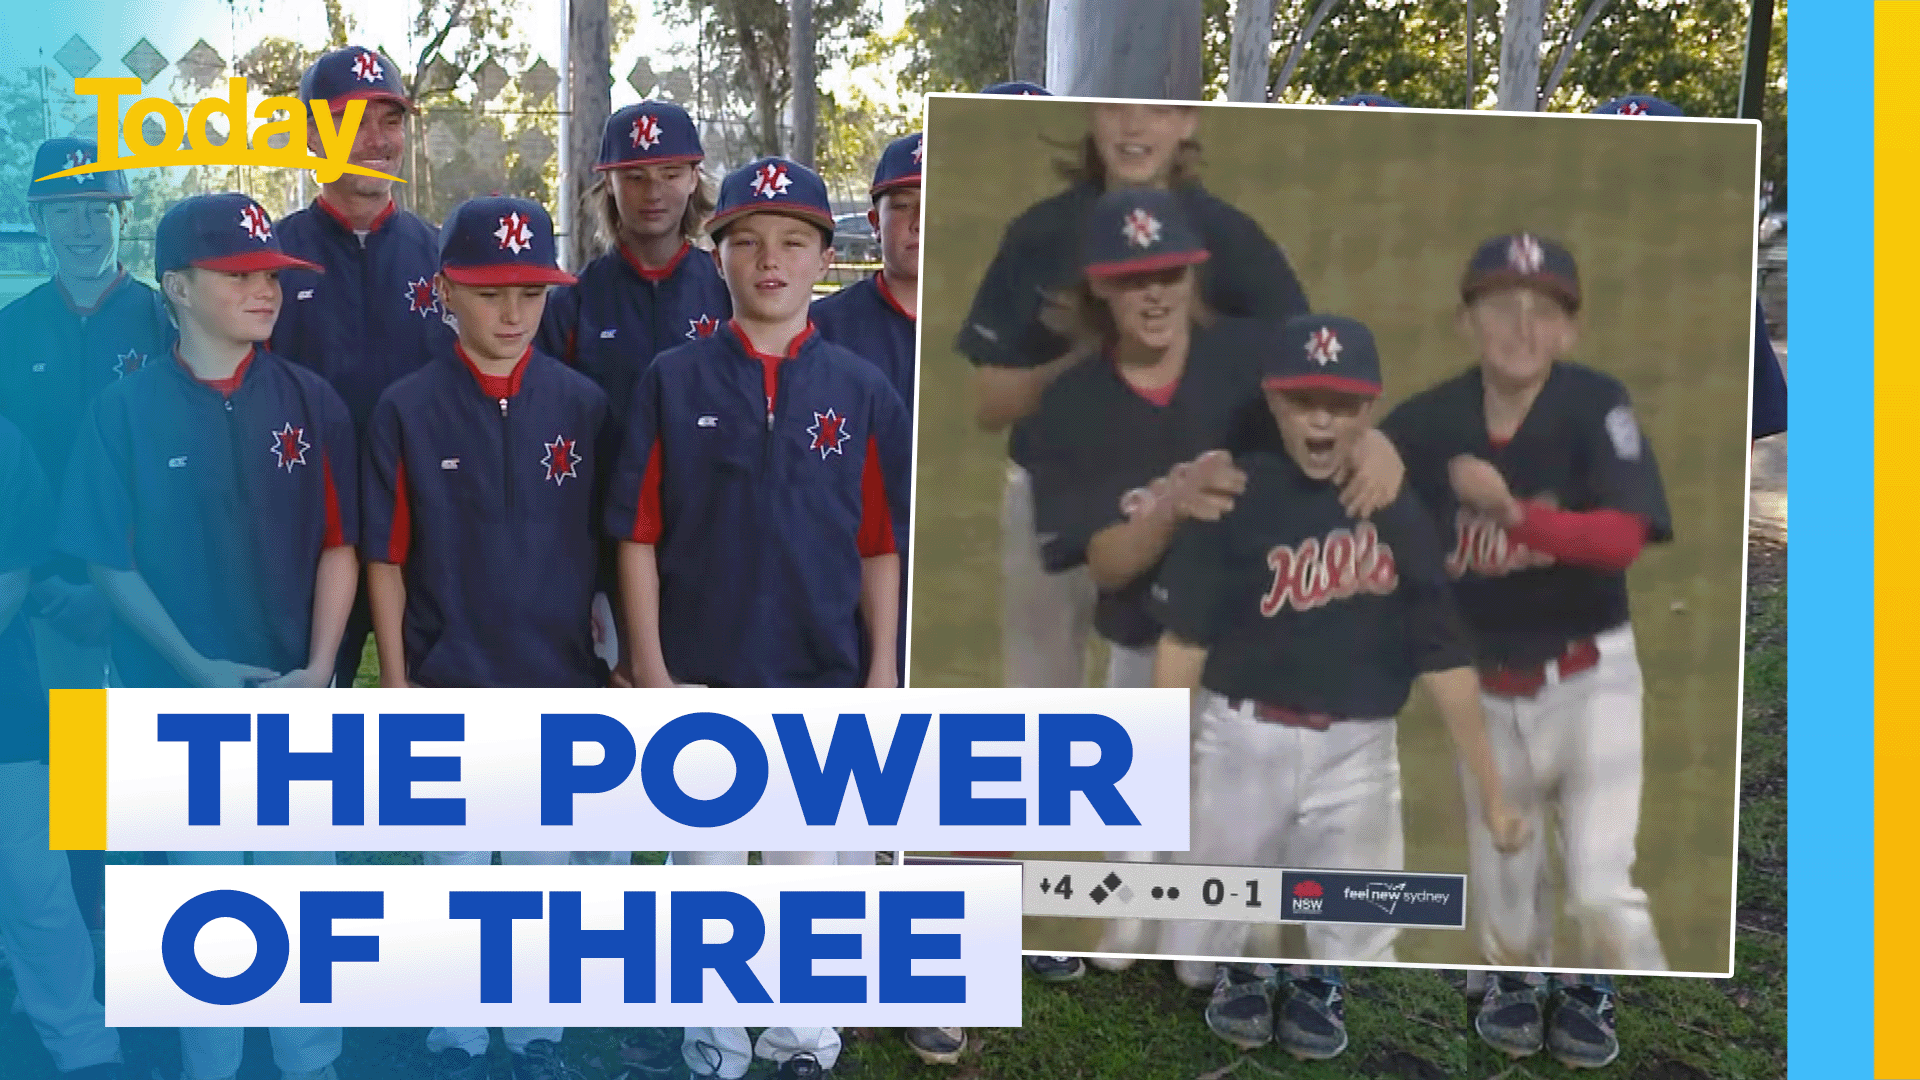 Talented triplets off to represent Australia at major Little League comp